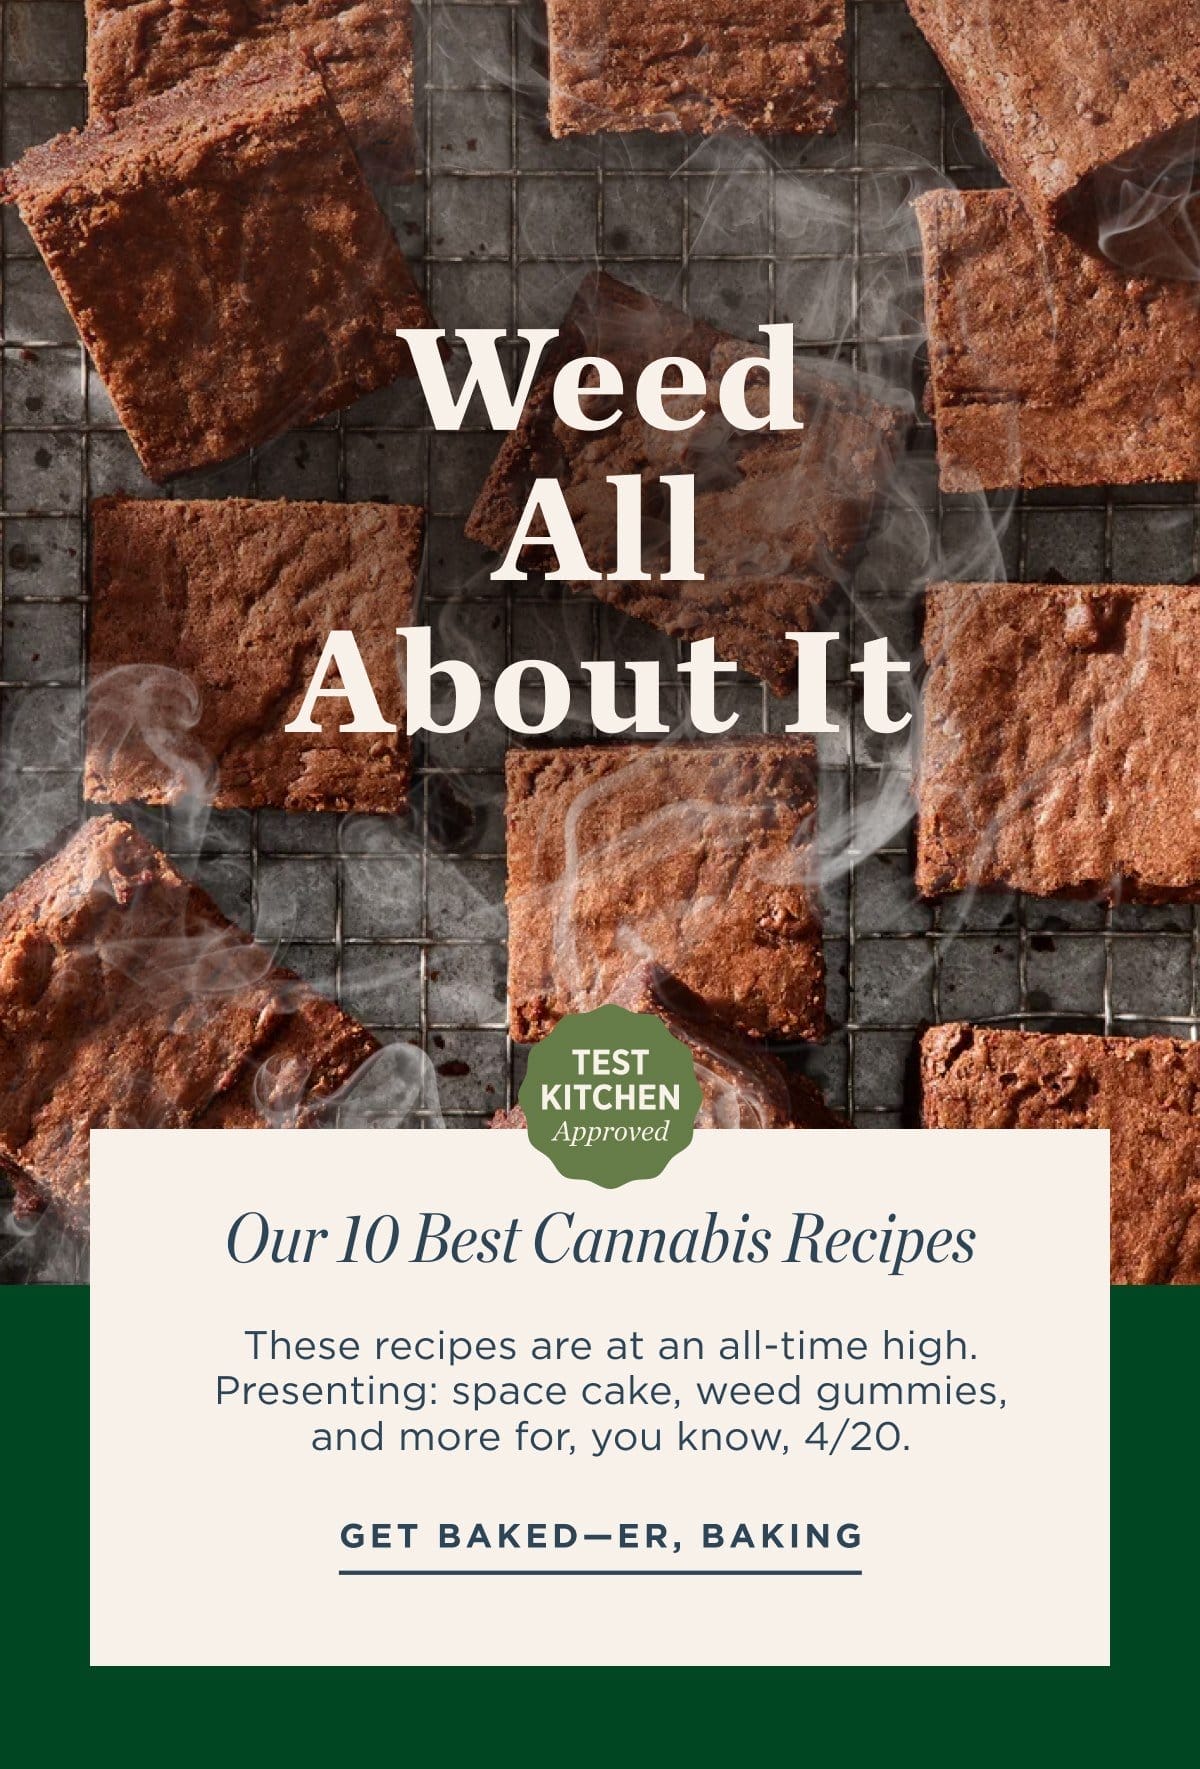 Our 10 Best Cannabis Recipes